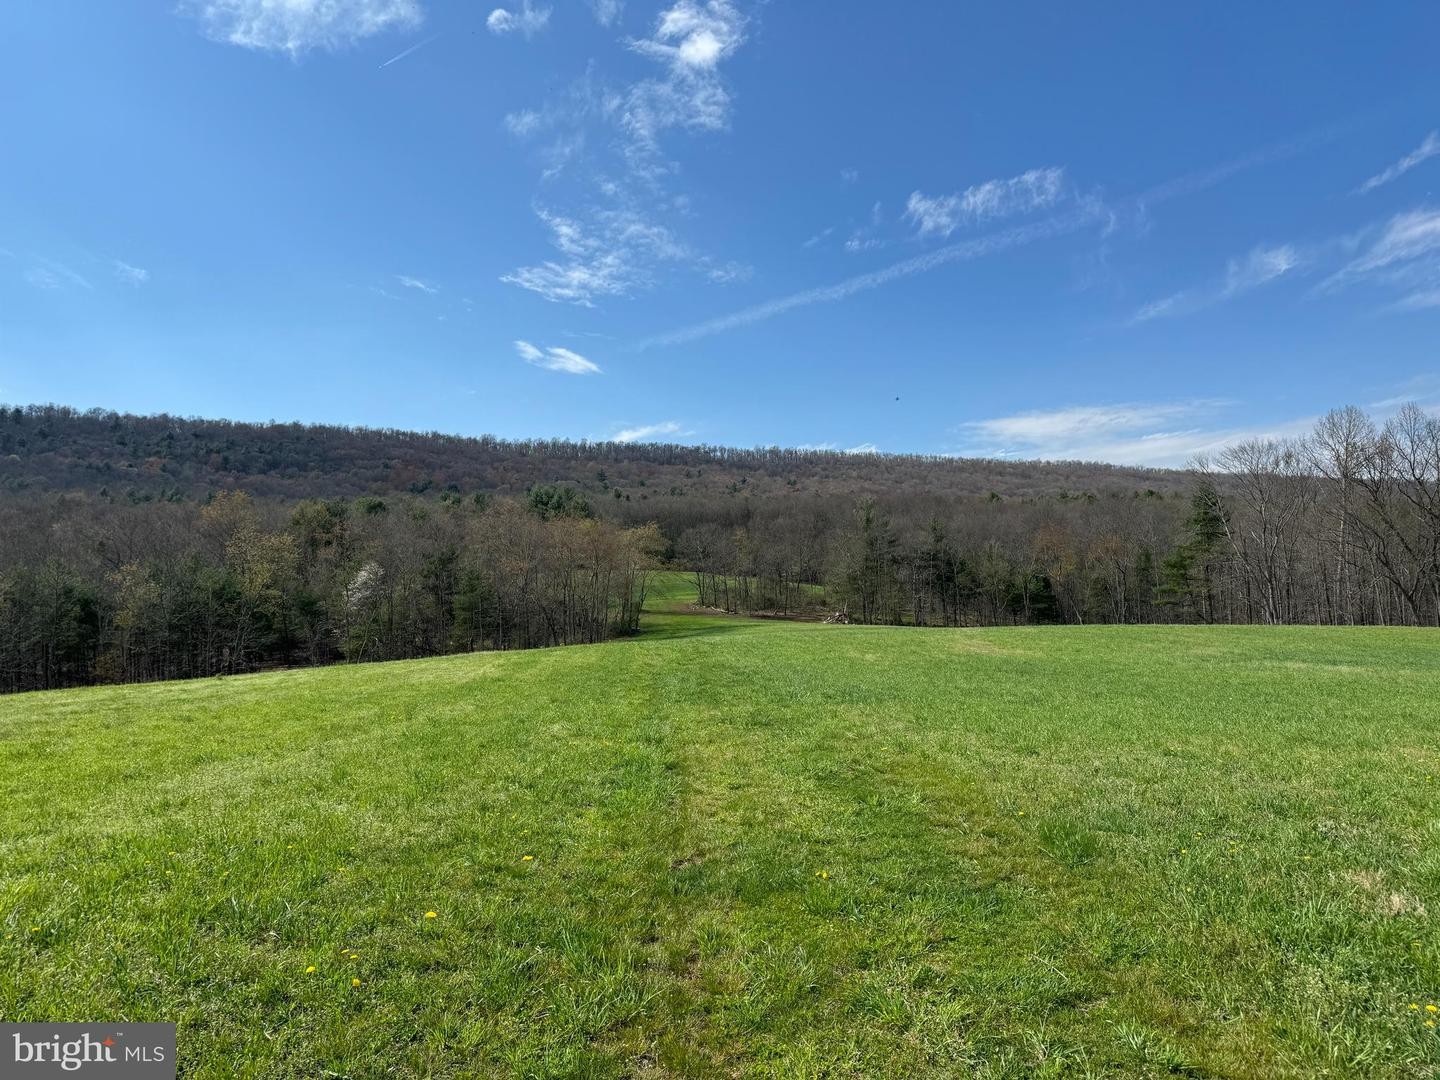 51. Tract 2: 15.23+/- Acres S Valley Rd